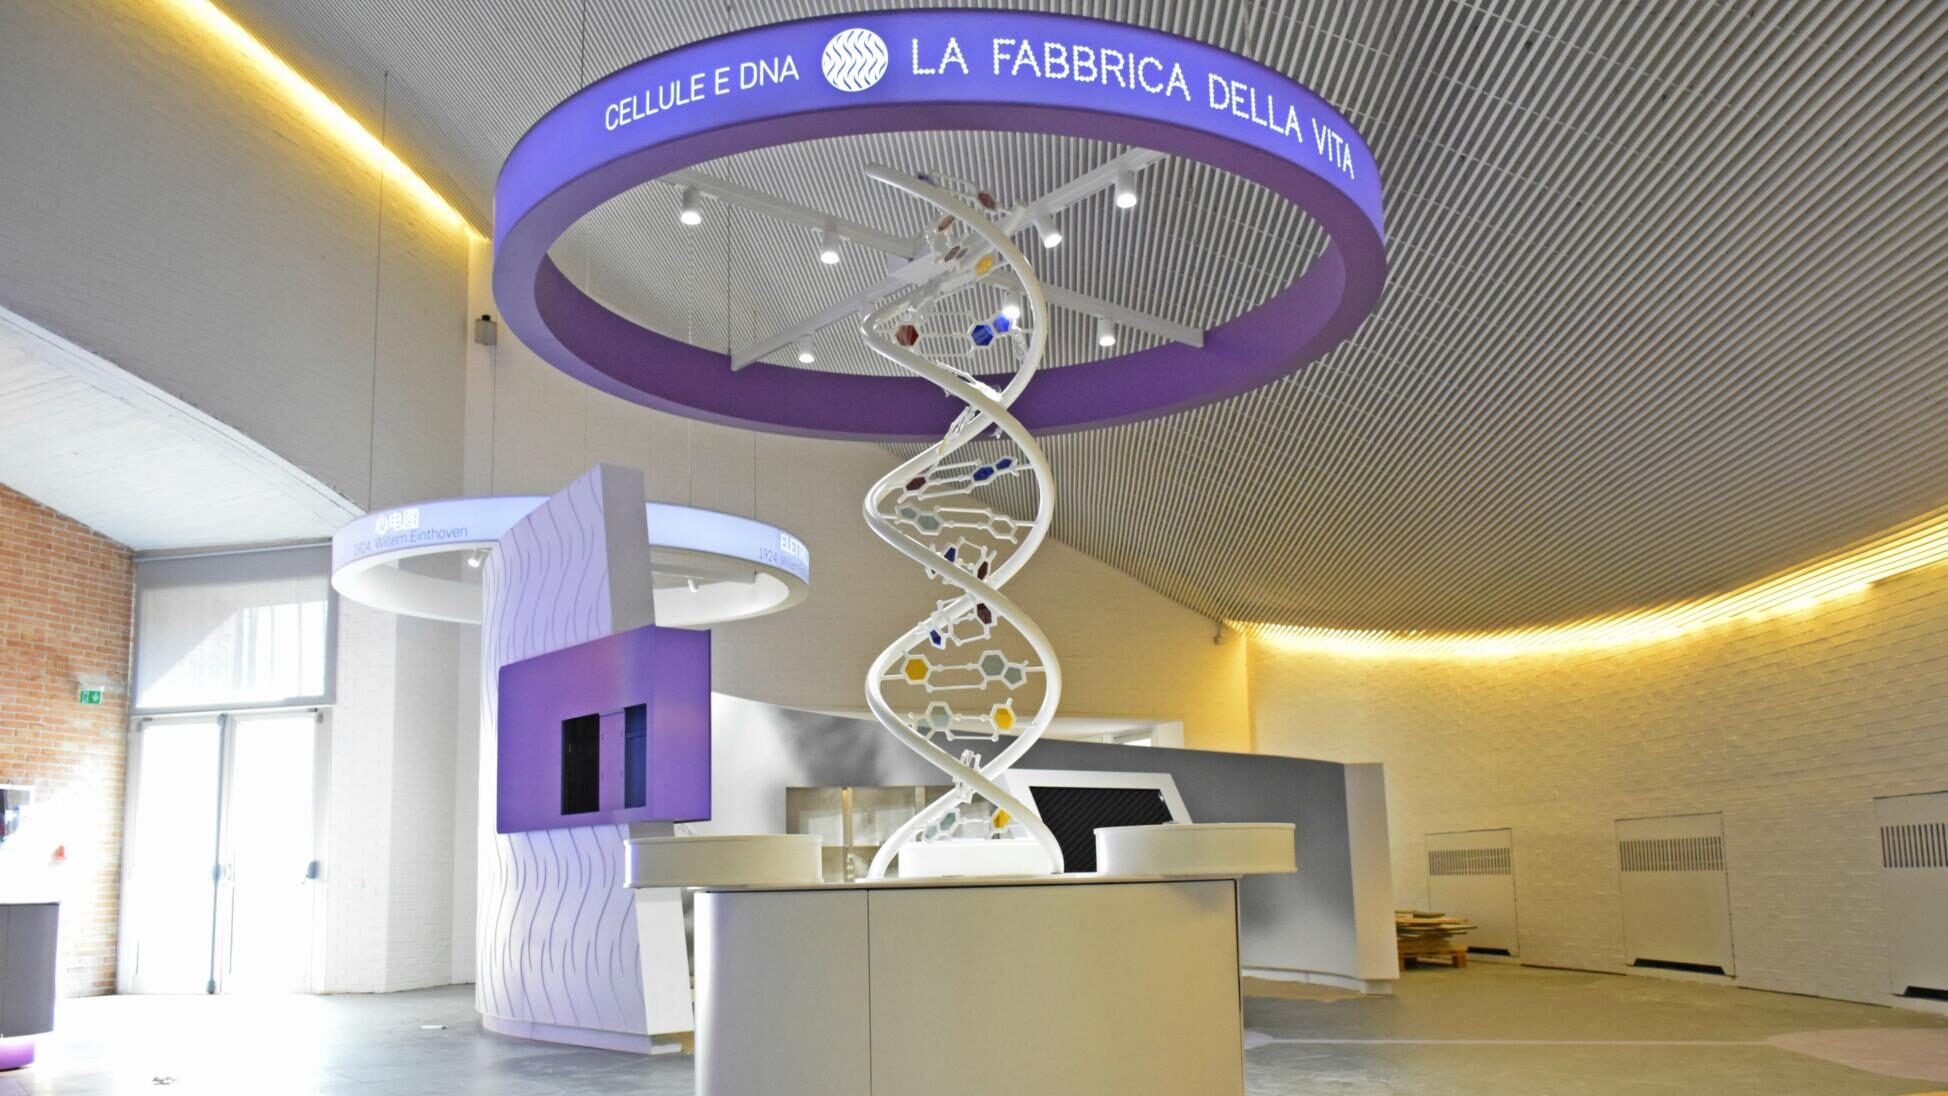 DNA-Spirale in City of Science